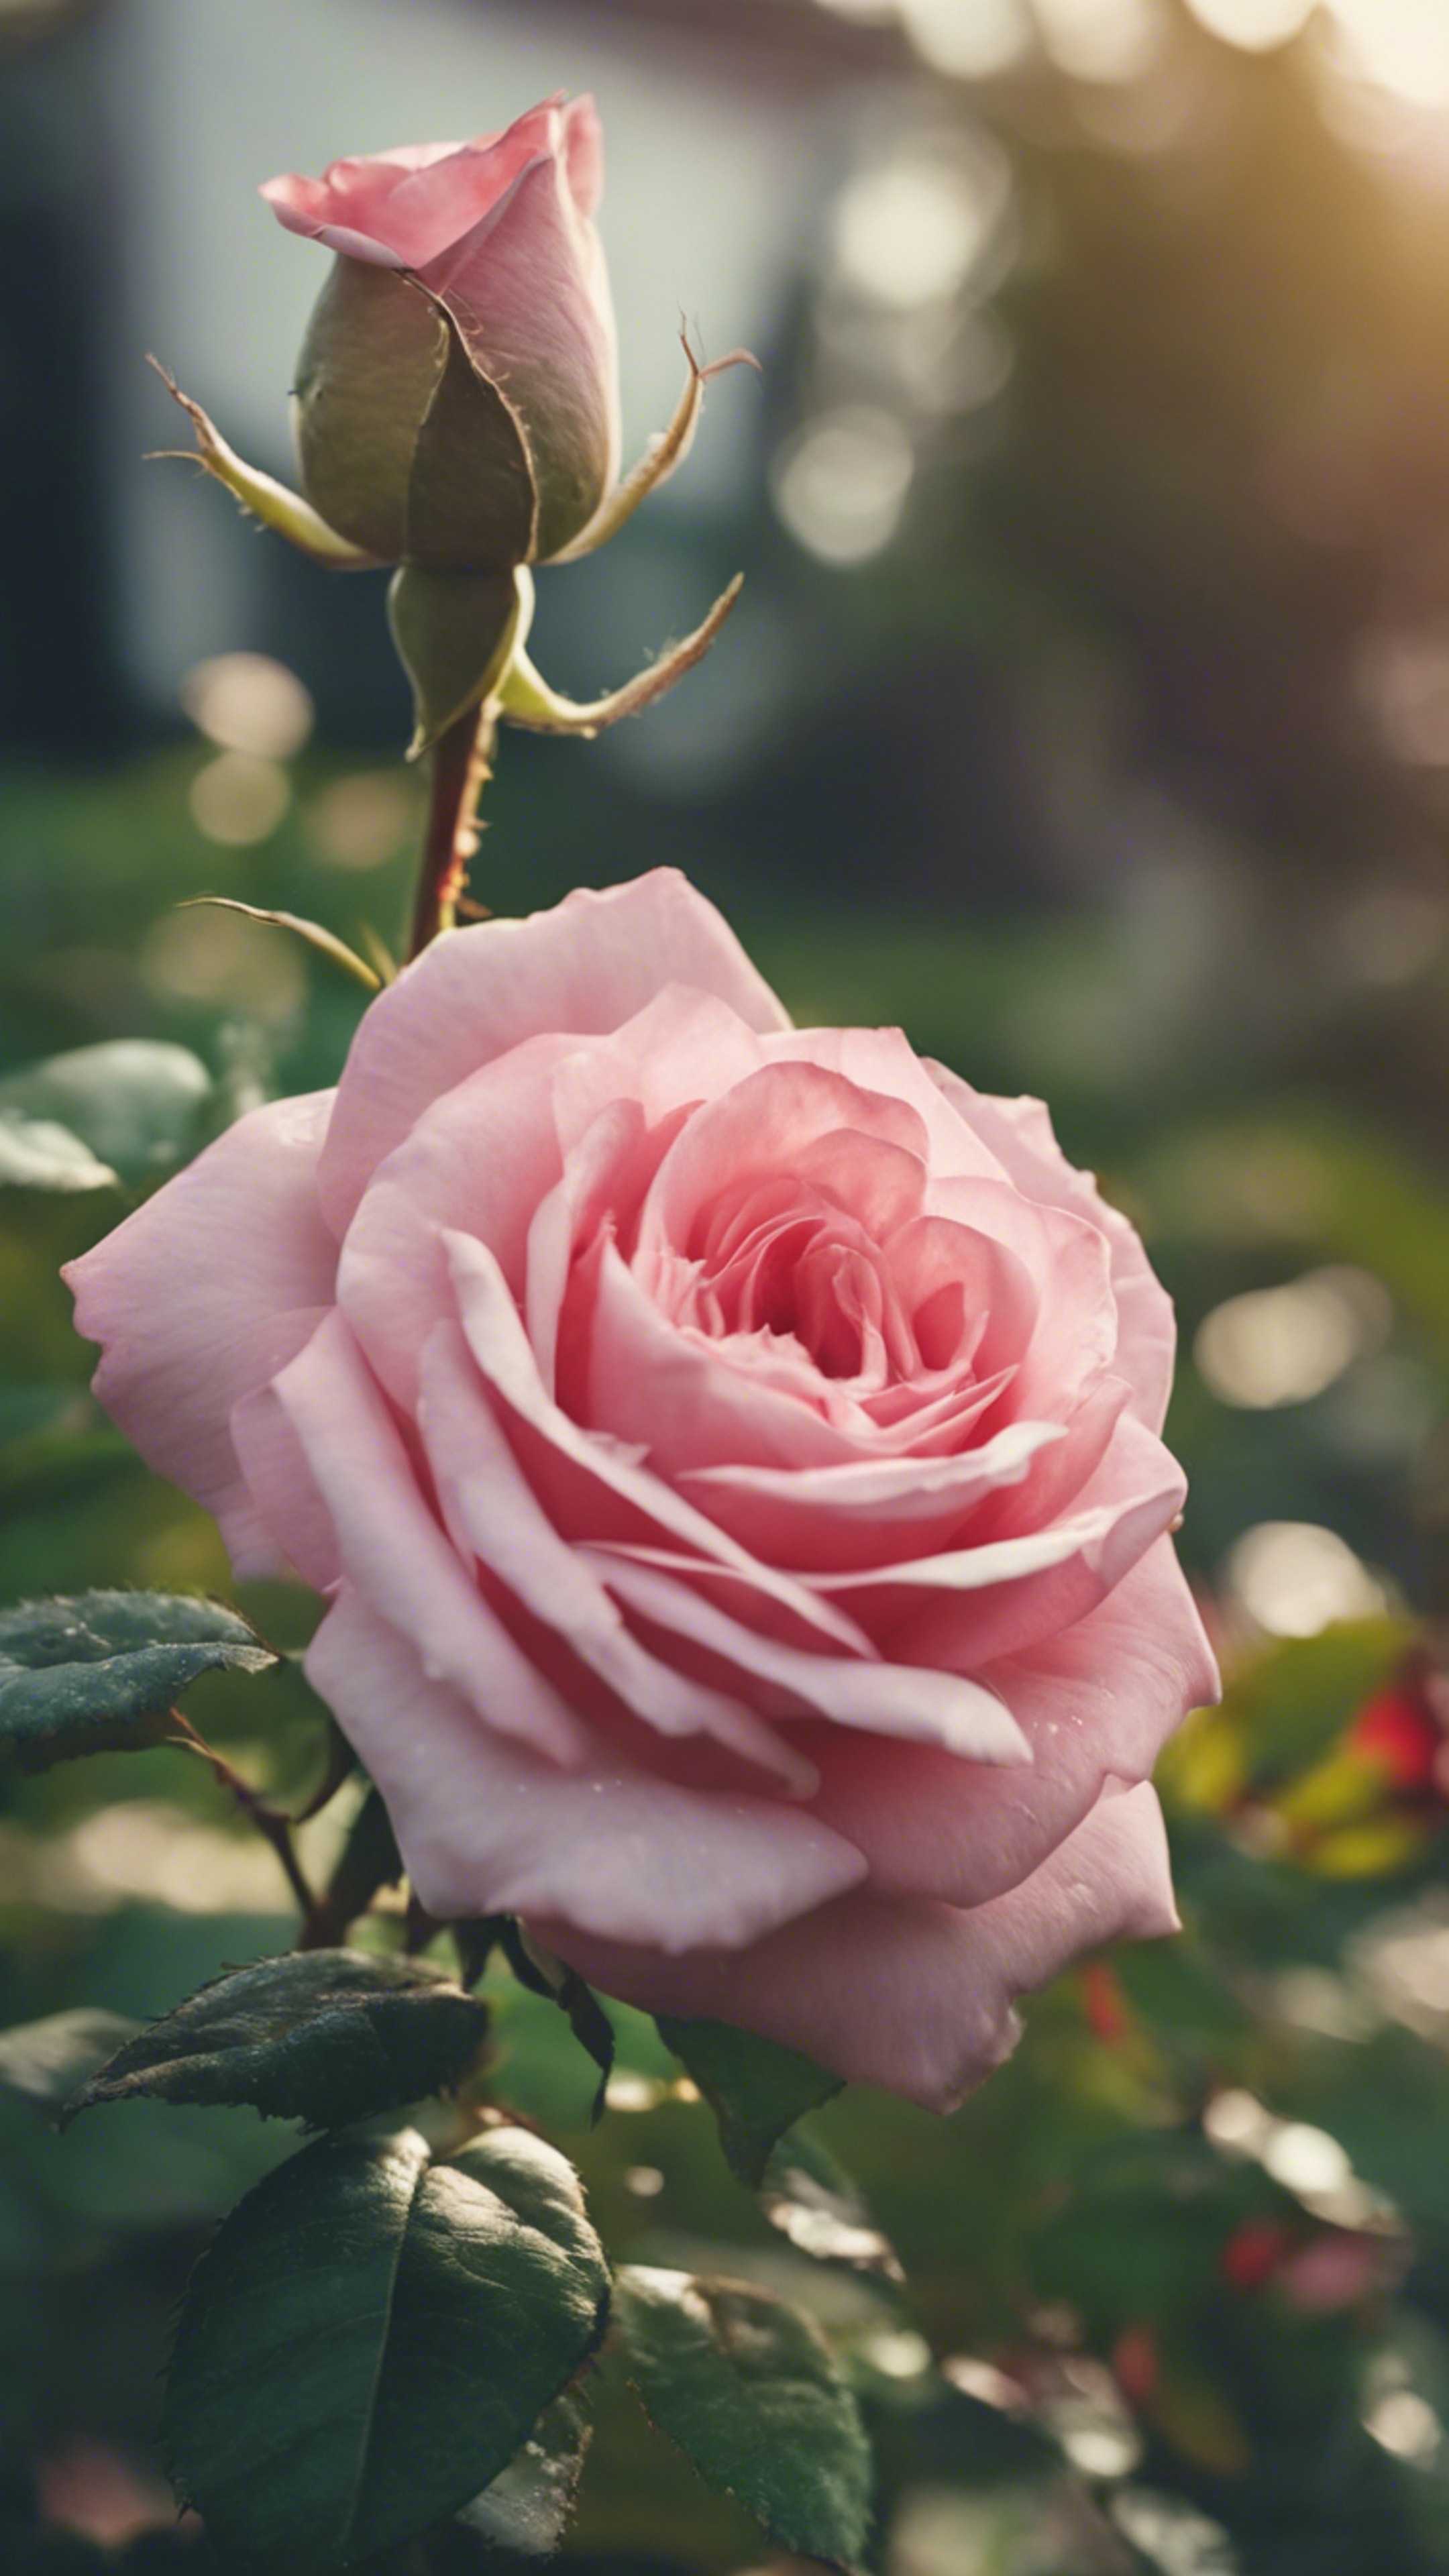 A beautiful pink heart-shaped rose blooming in a lush green garden.壁紙[602cae484ee541a8ab0b]